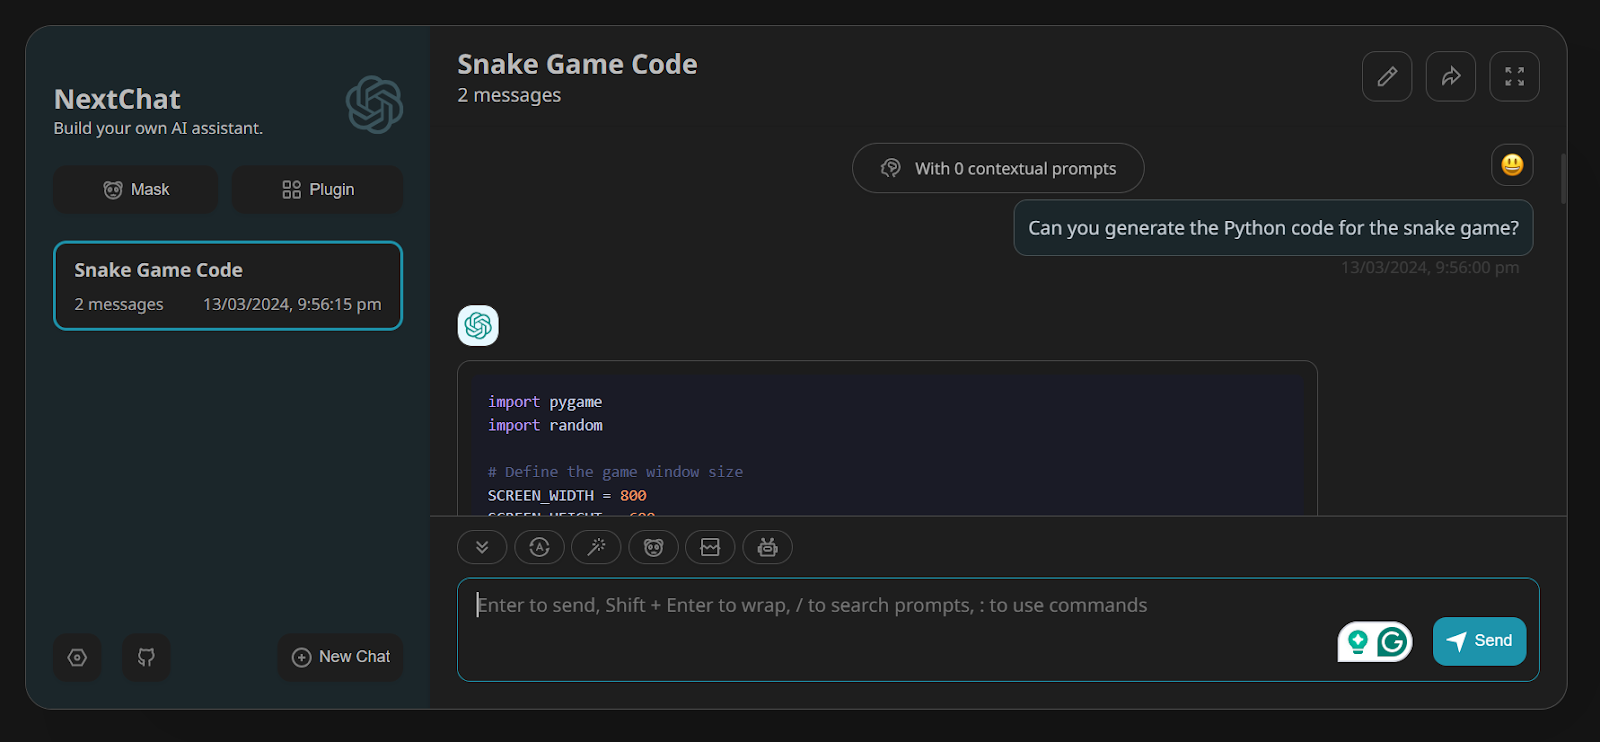 writing prompt to generate the Python code for snake game